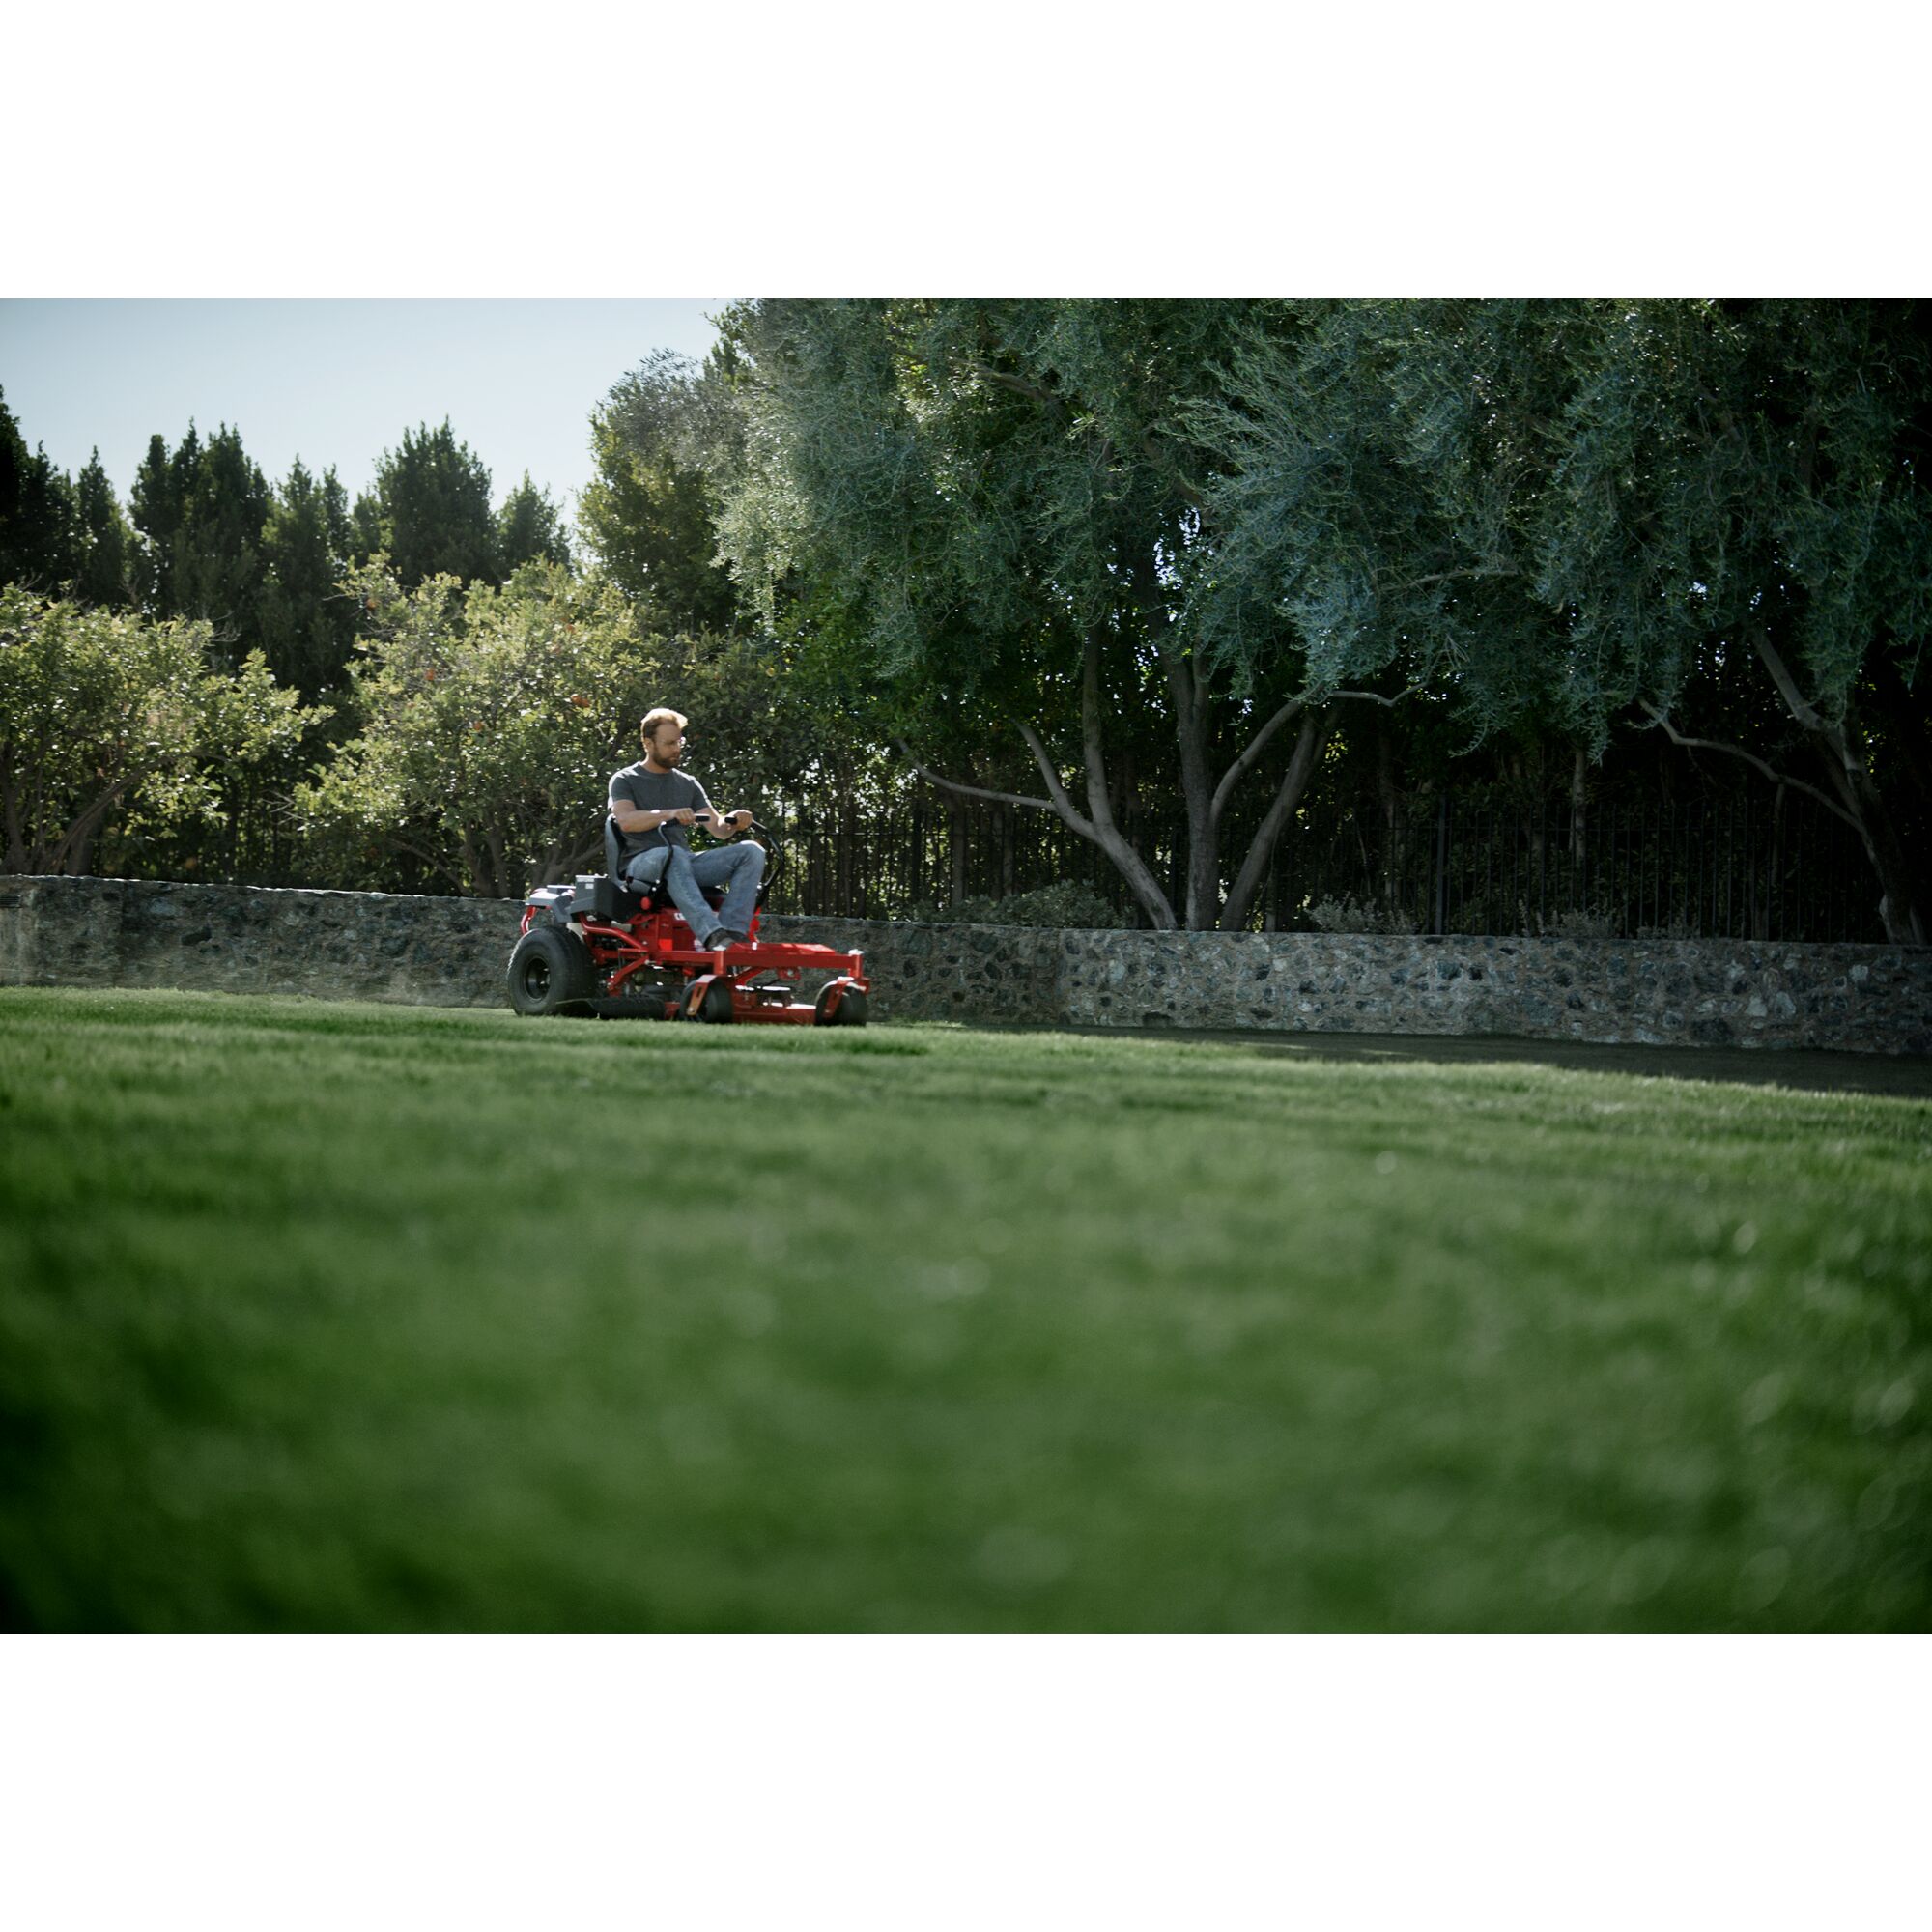 22 h p 46 inch zero turn riding mower being used by a person to mow the lawn.